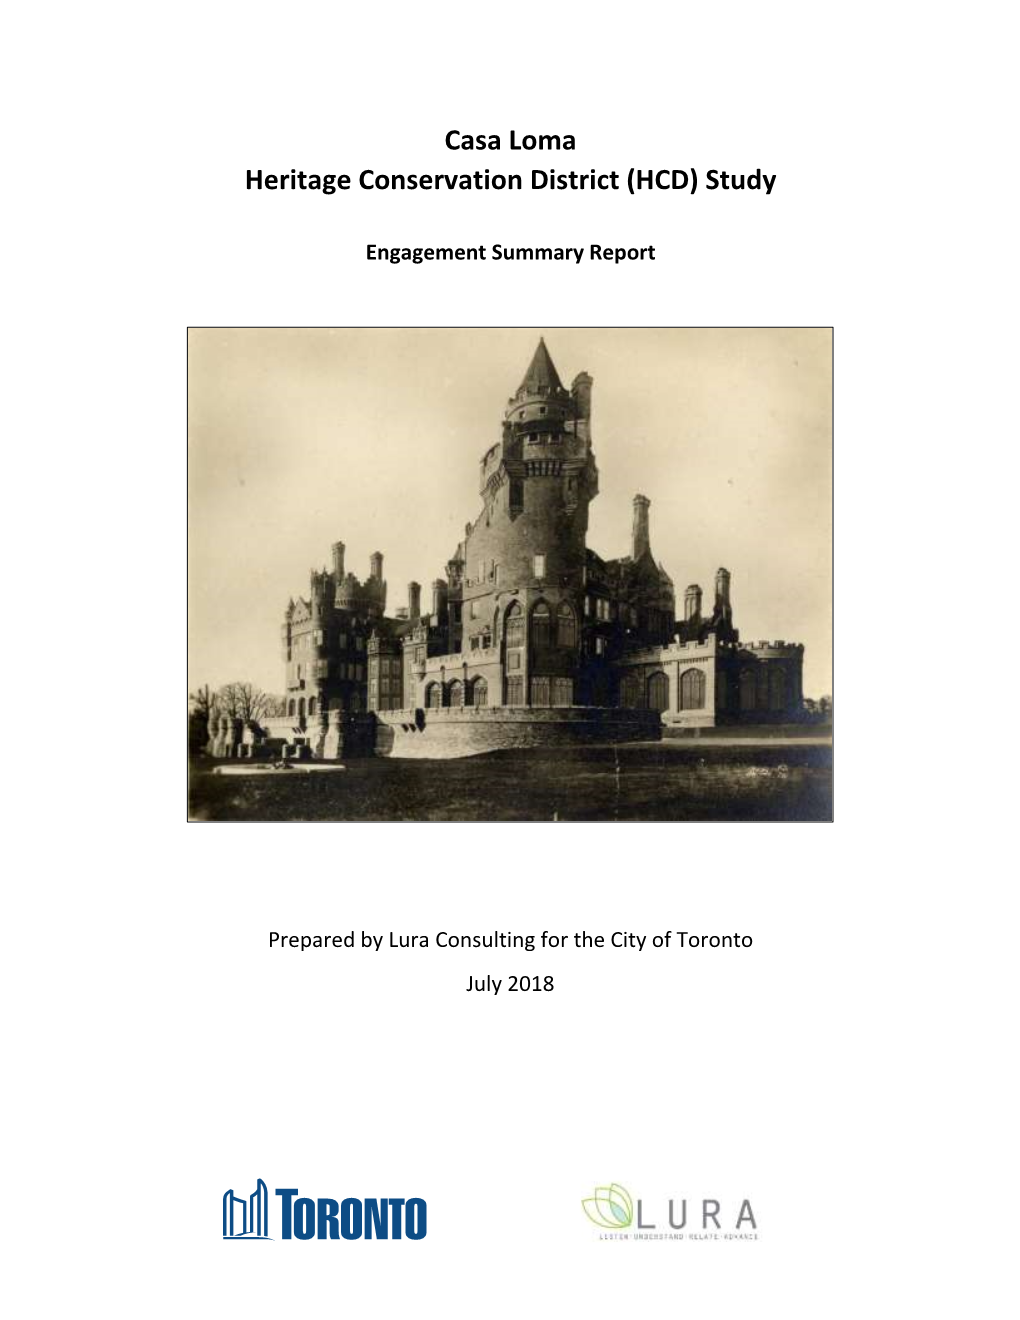 Casa Loma Heritage Conservation District Study Community Consultation Meeting #1 – Summary Report